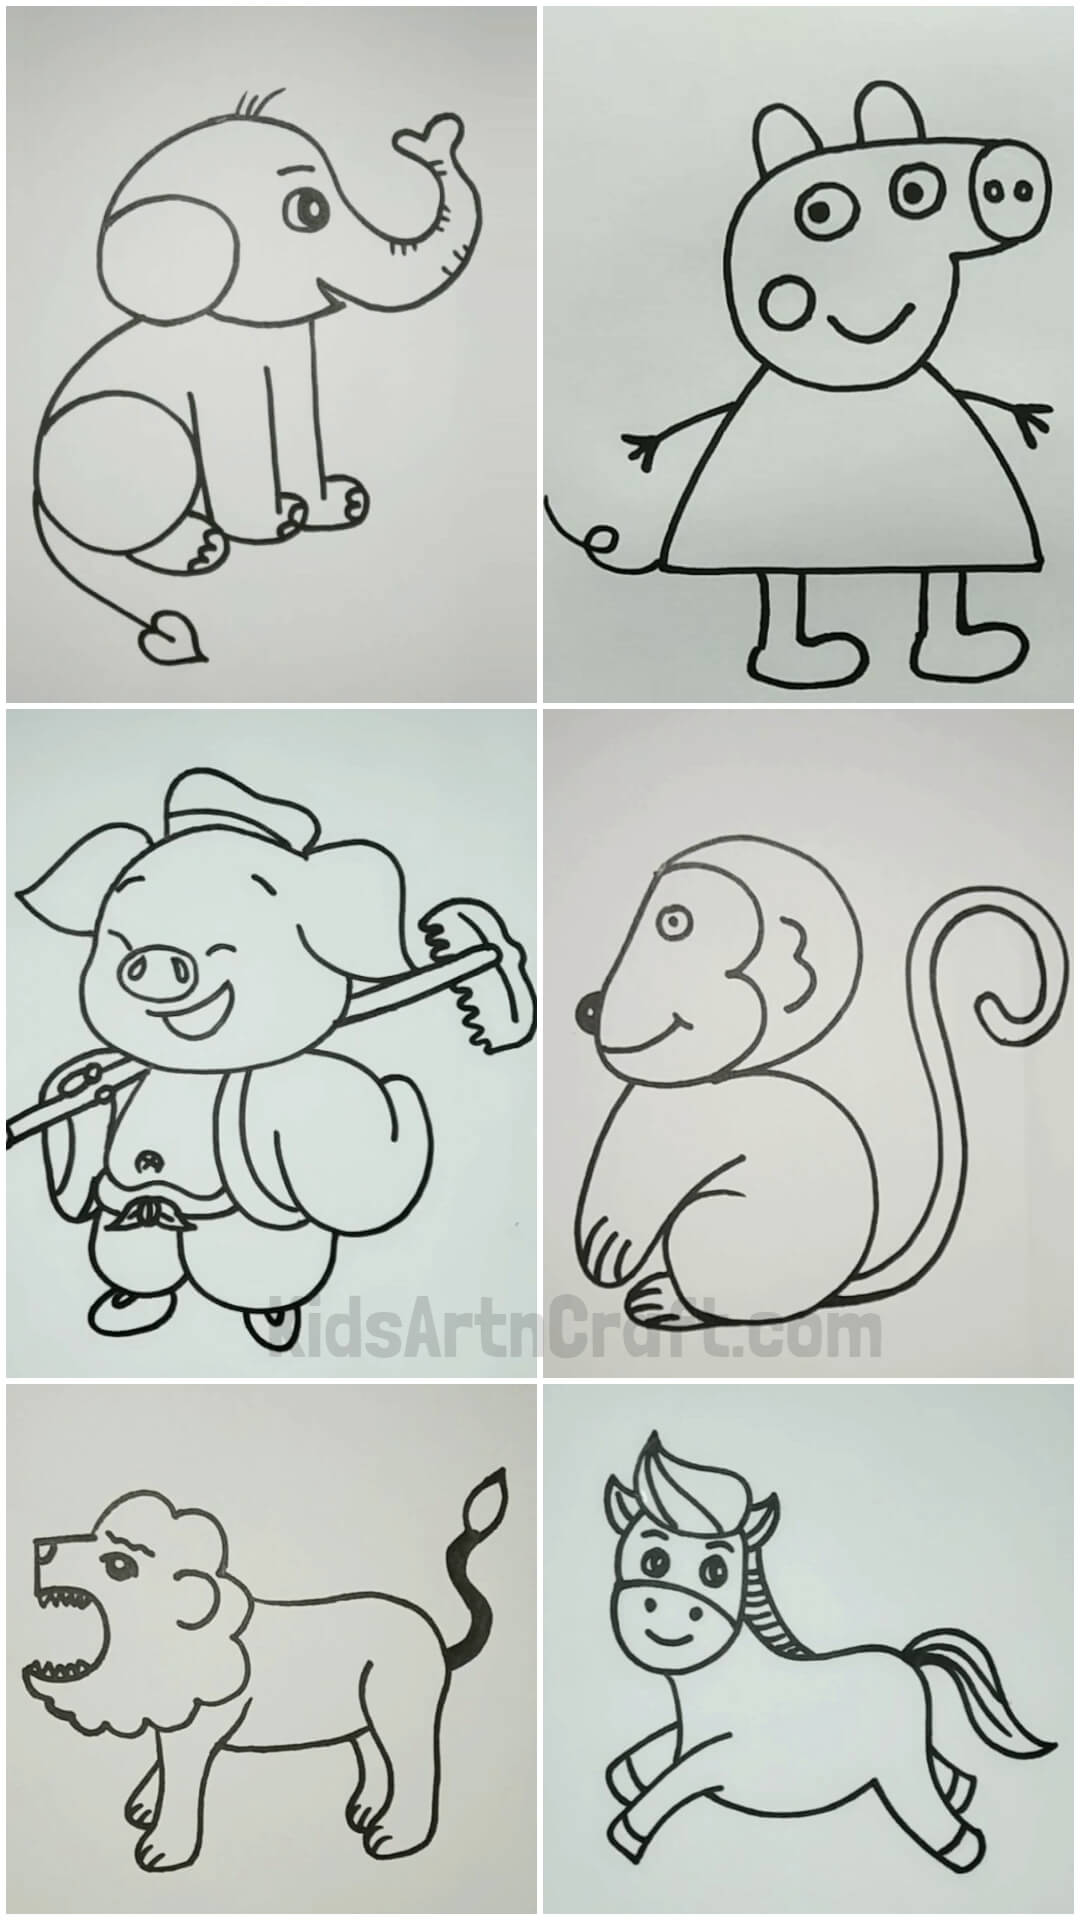 Cute Animals Drawing - How To Draw Cute Animals Step By Step